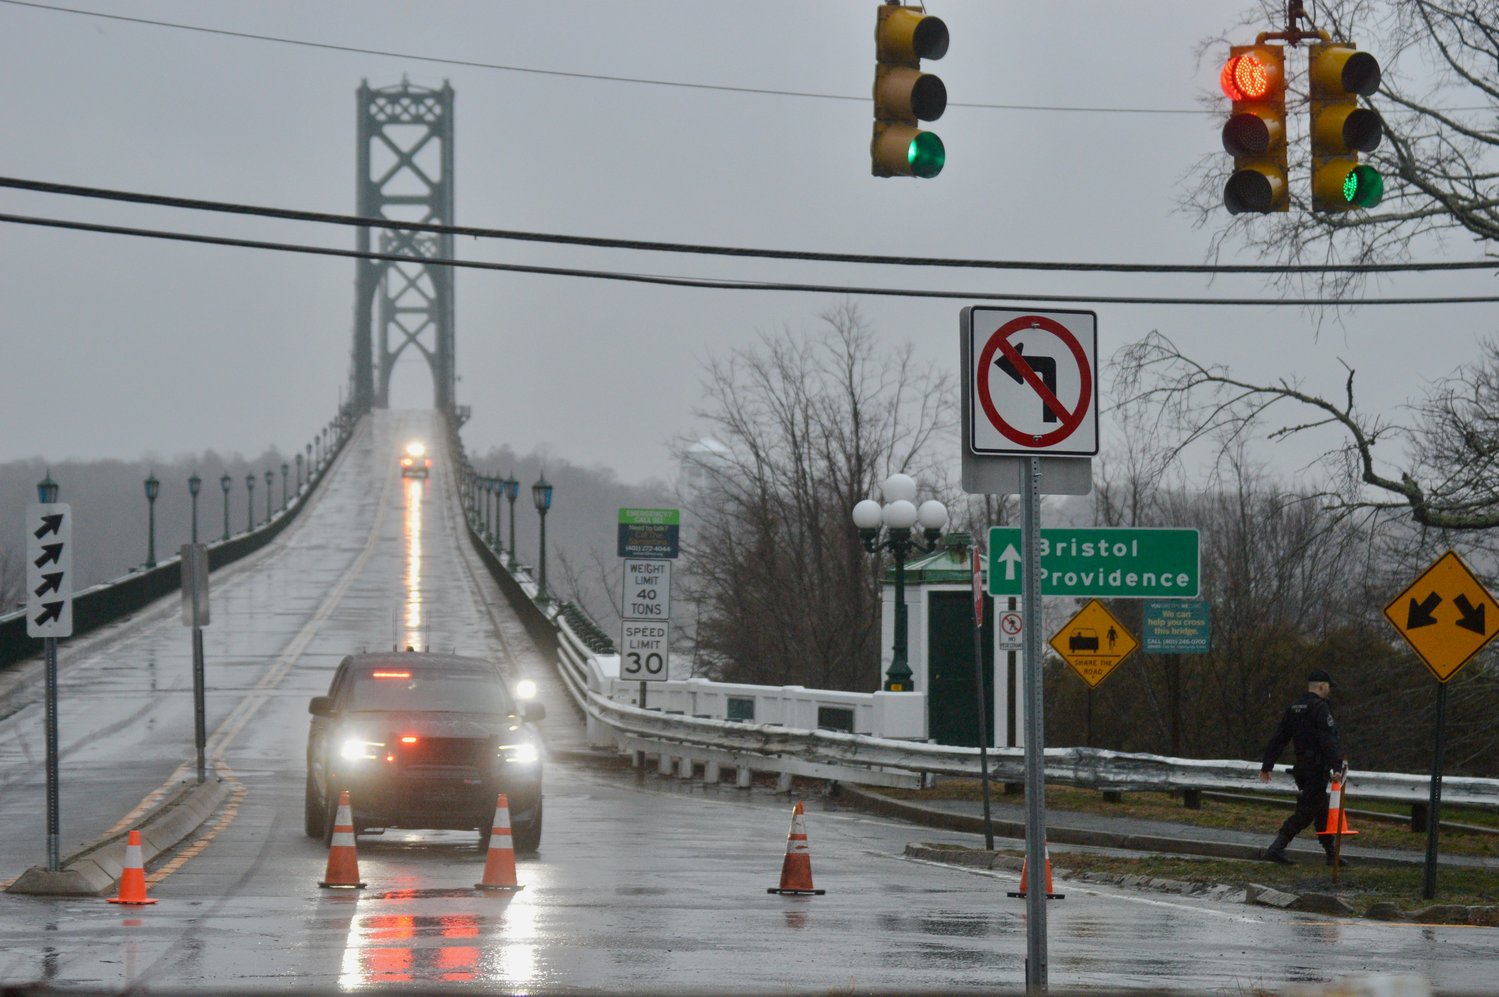 The Mt. Hope Bridge was closed earlier this morning due to high winds, but has since been re-opened.